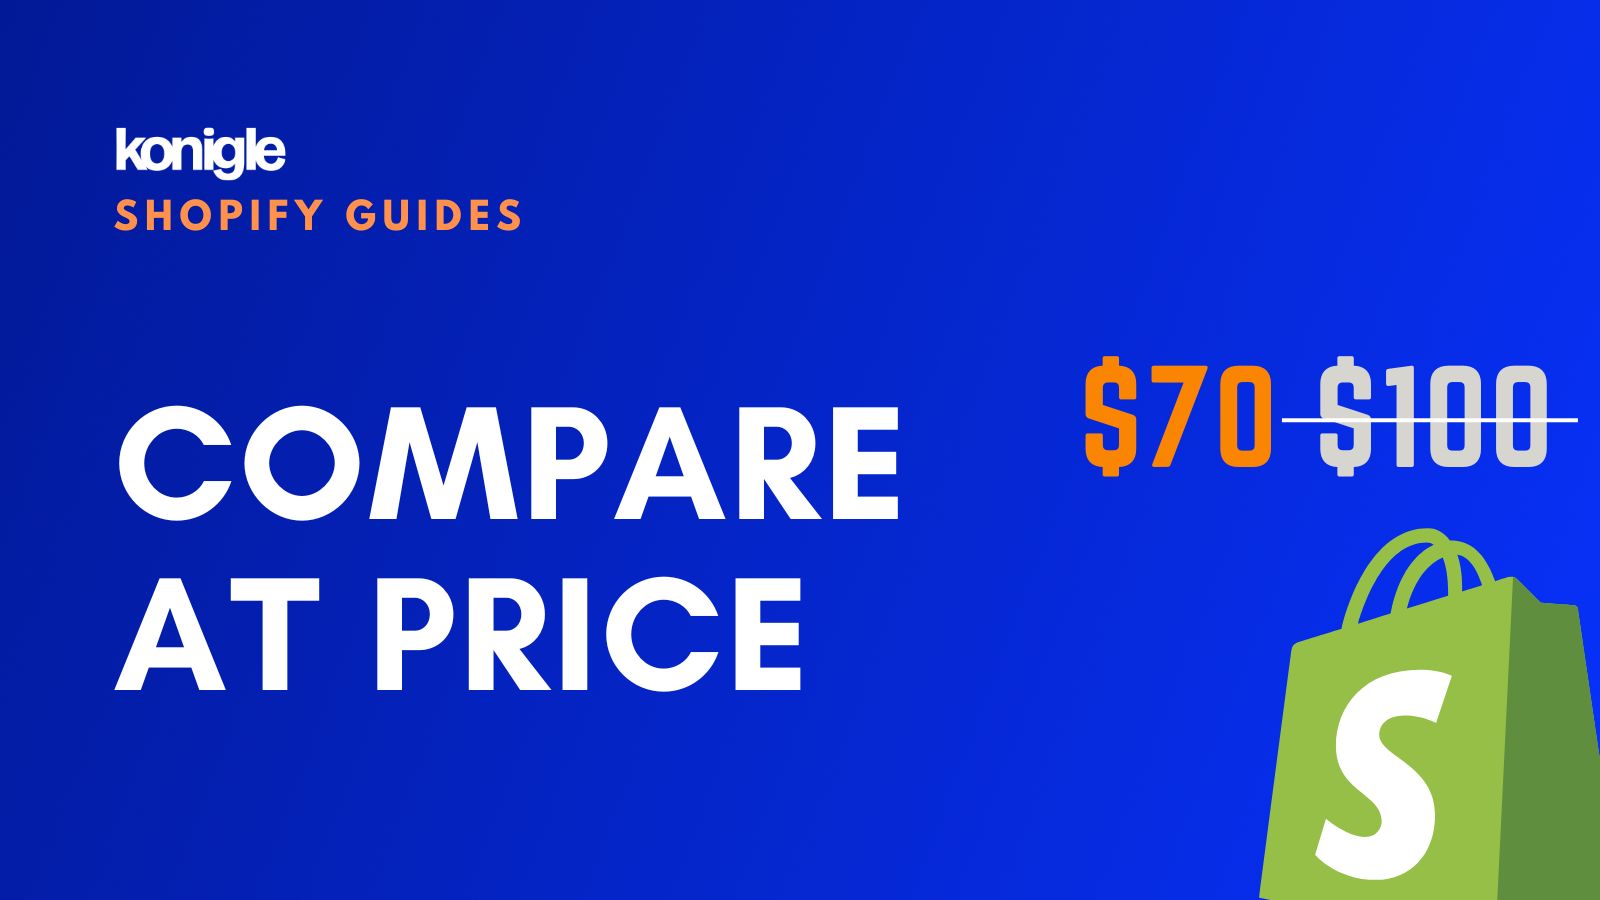 Shopify Compare At Price: How to use price effectively?